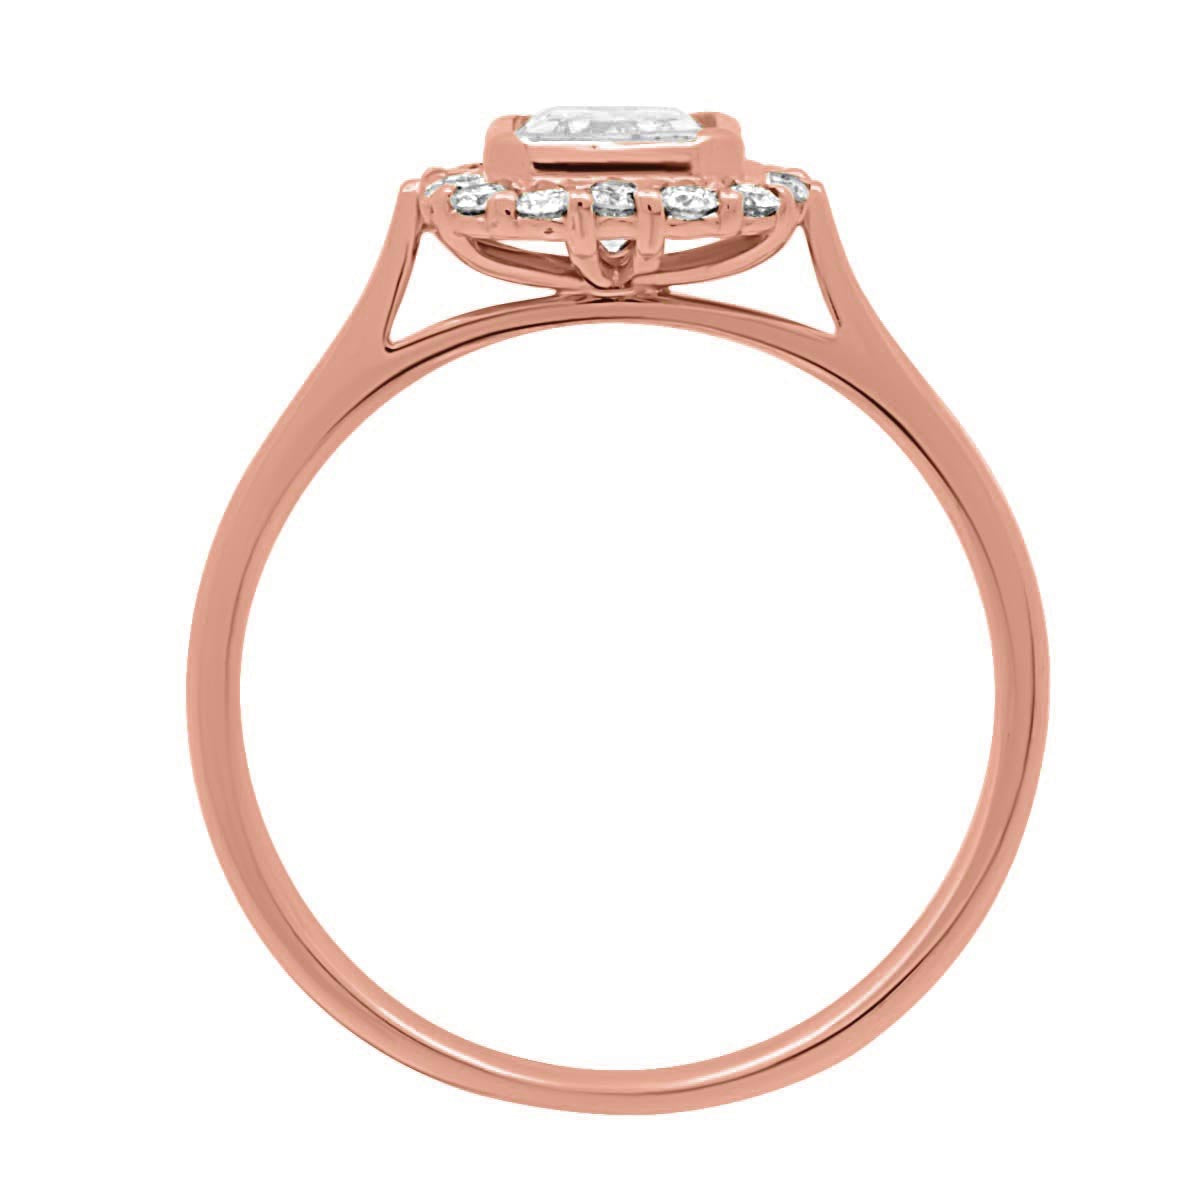 Emerald Halo Engagement Ring in rose gold pictured standing vertically